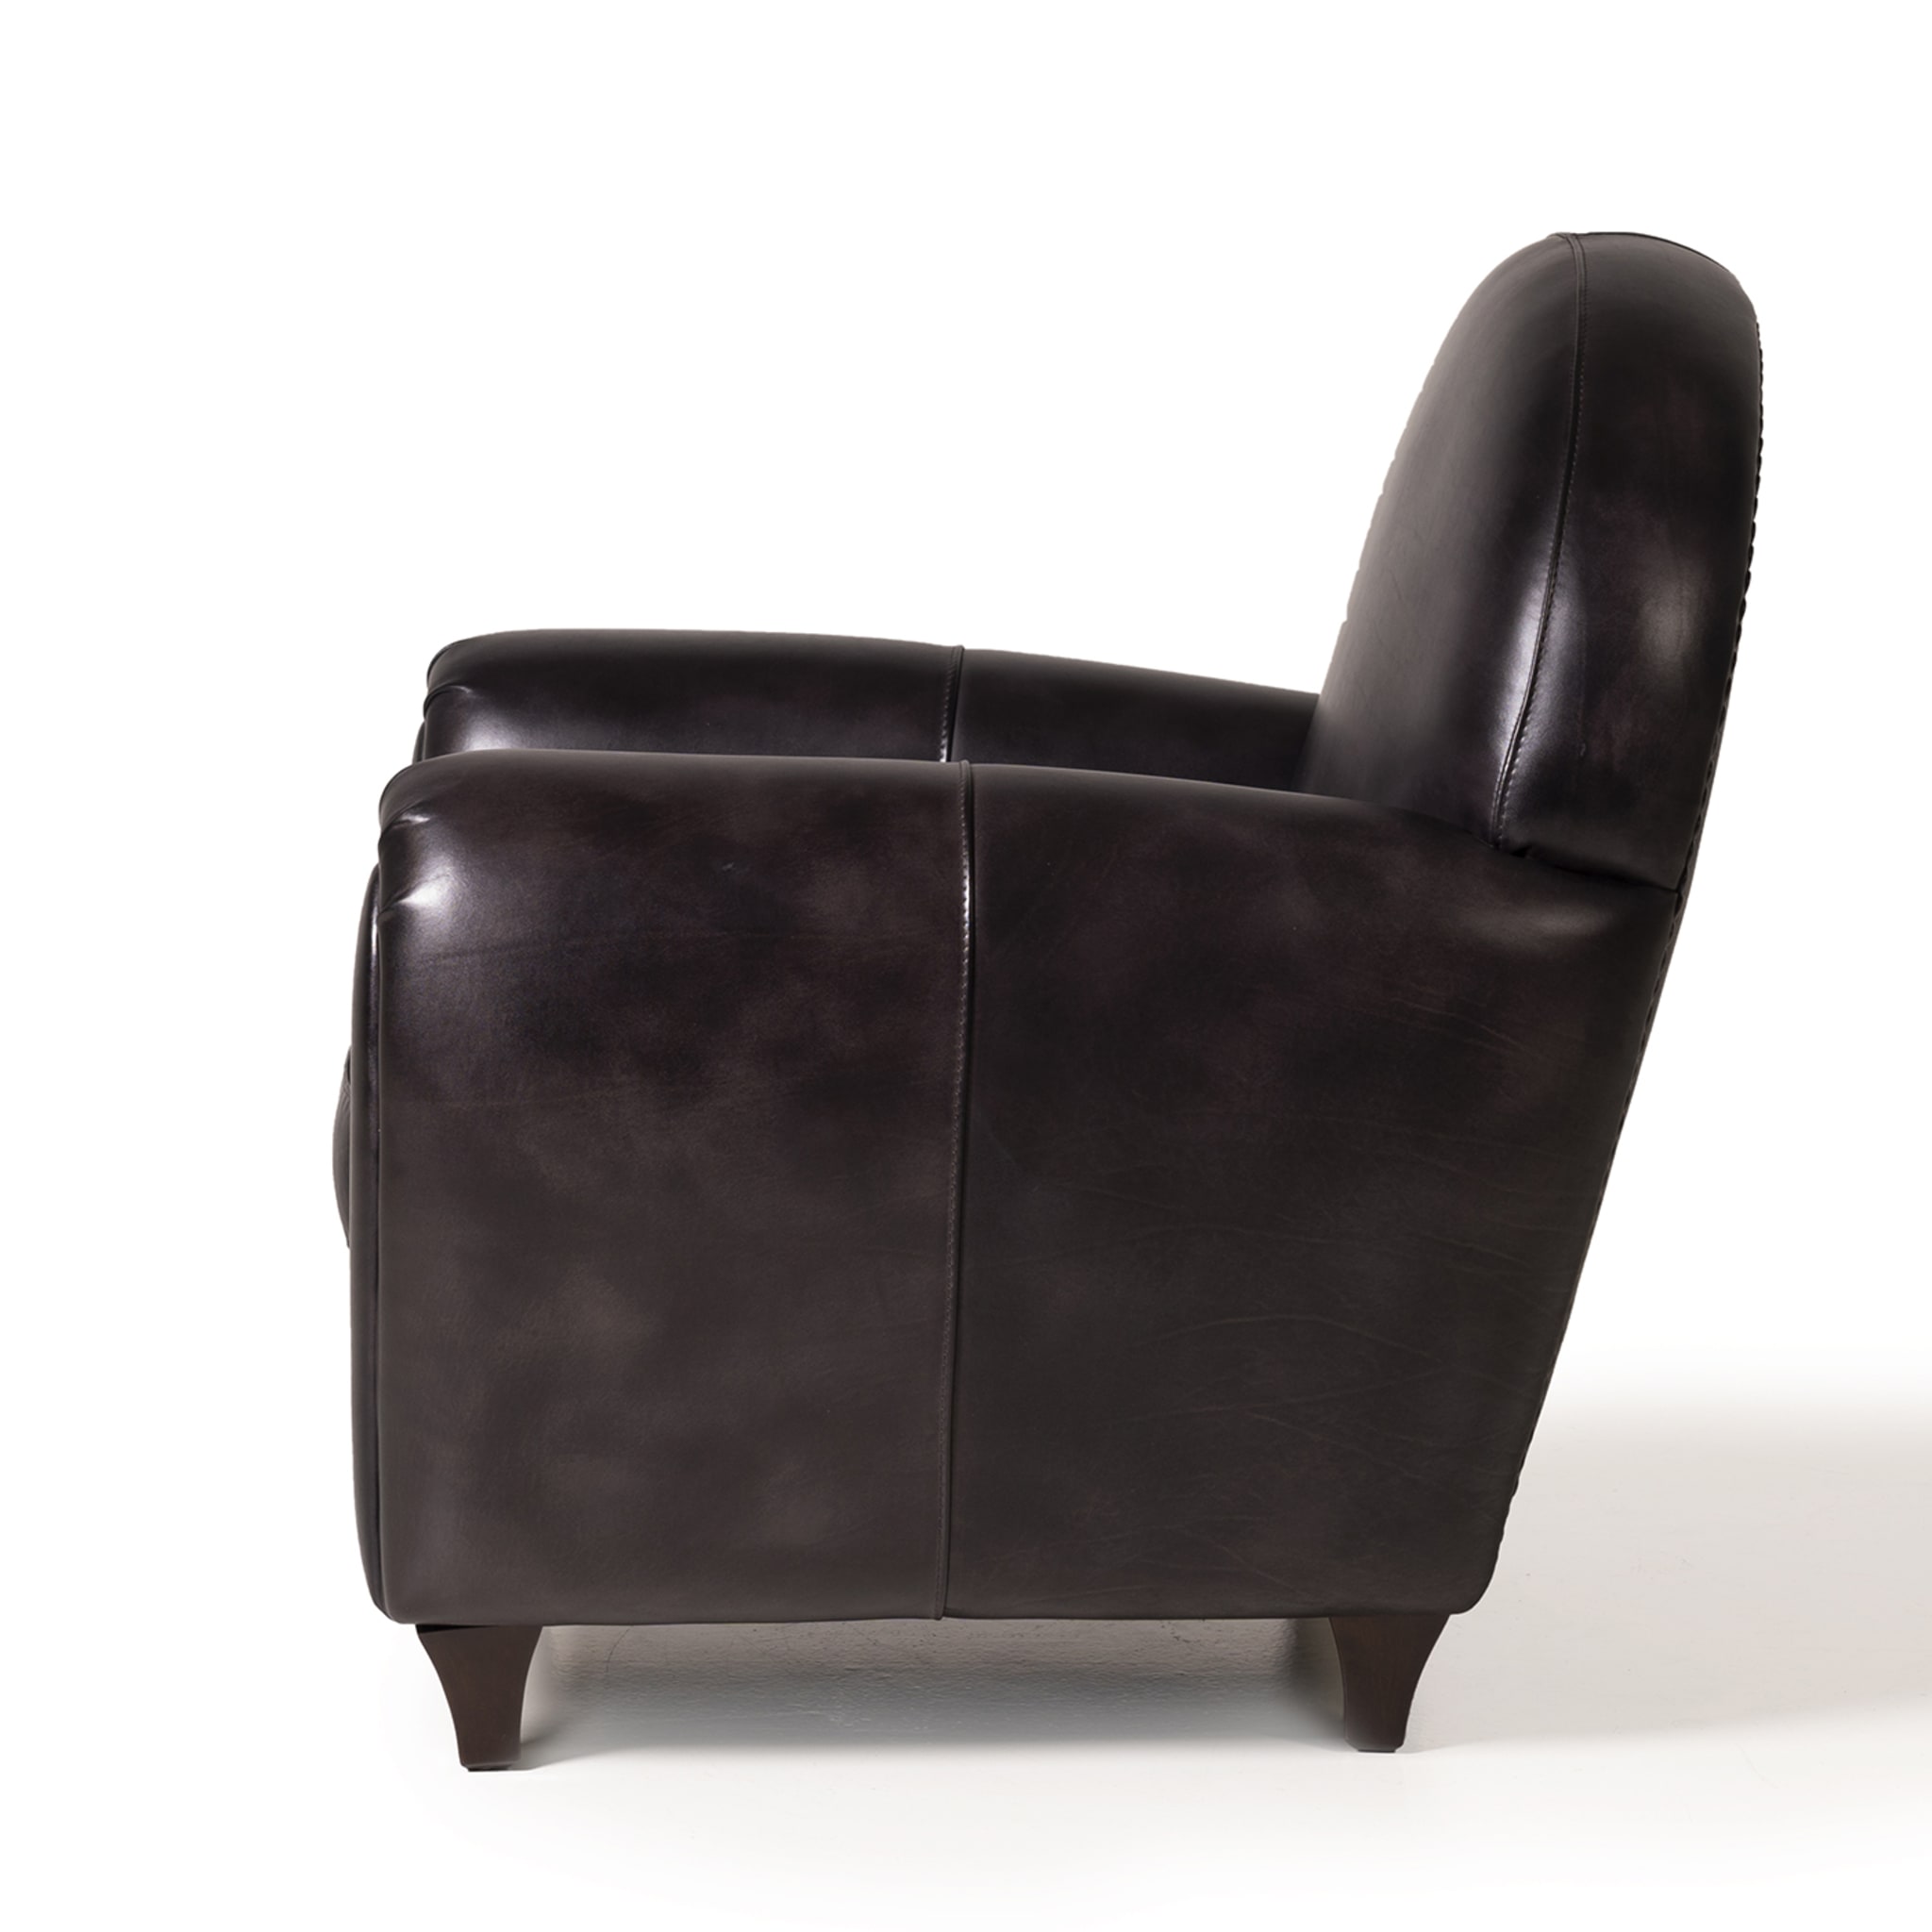 Club Armchair by Marco and Giulio Mantellassi - Alternative view 1